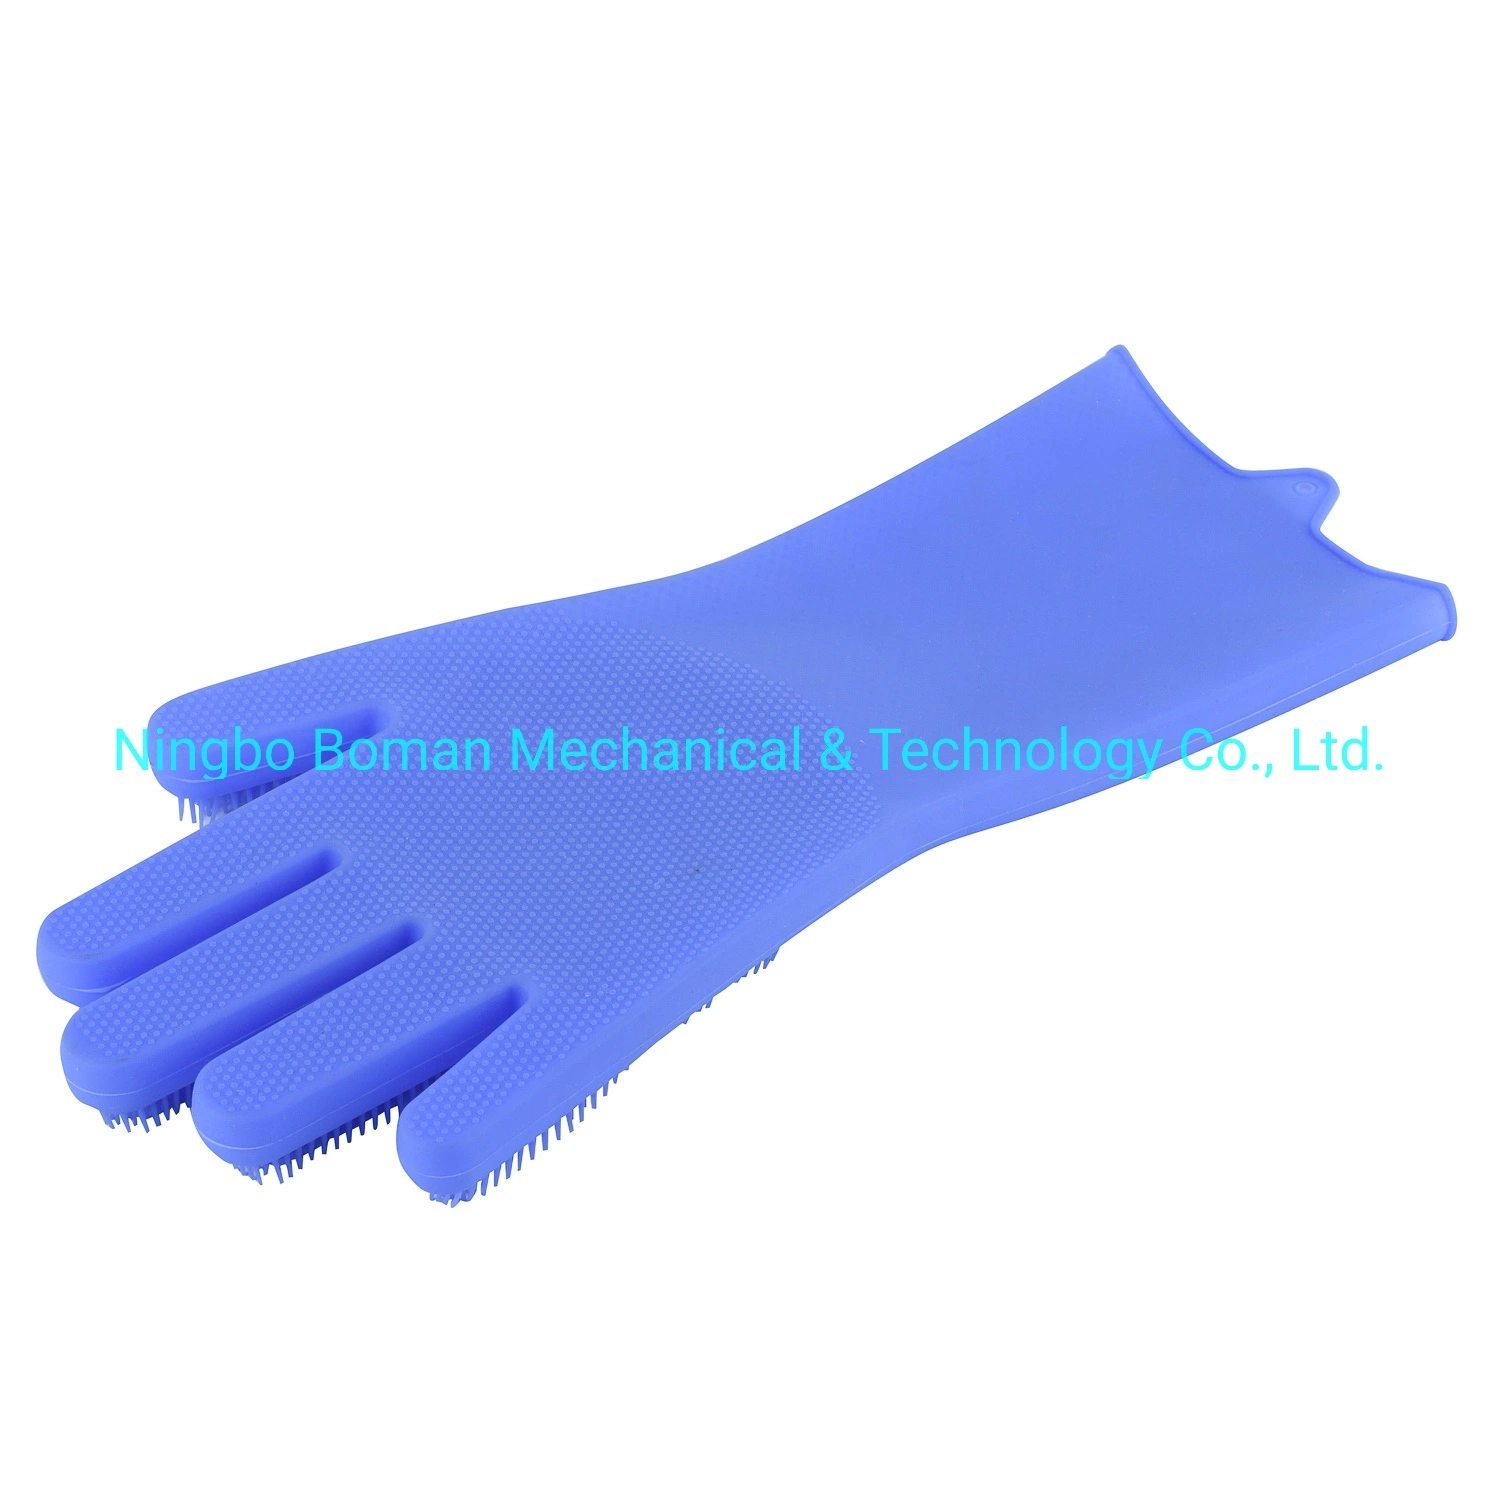 Food Grade Silicone Product, Silicone Rubber Seal, Silica Gel Products